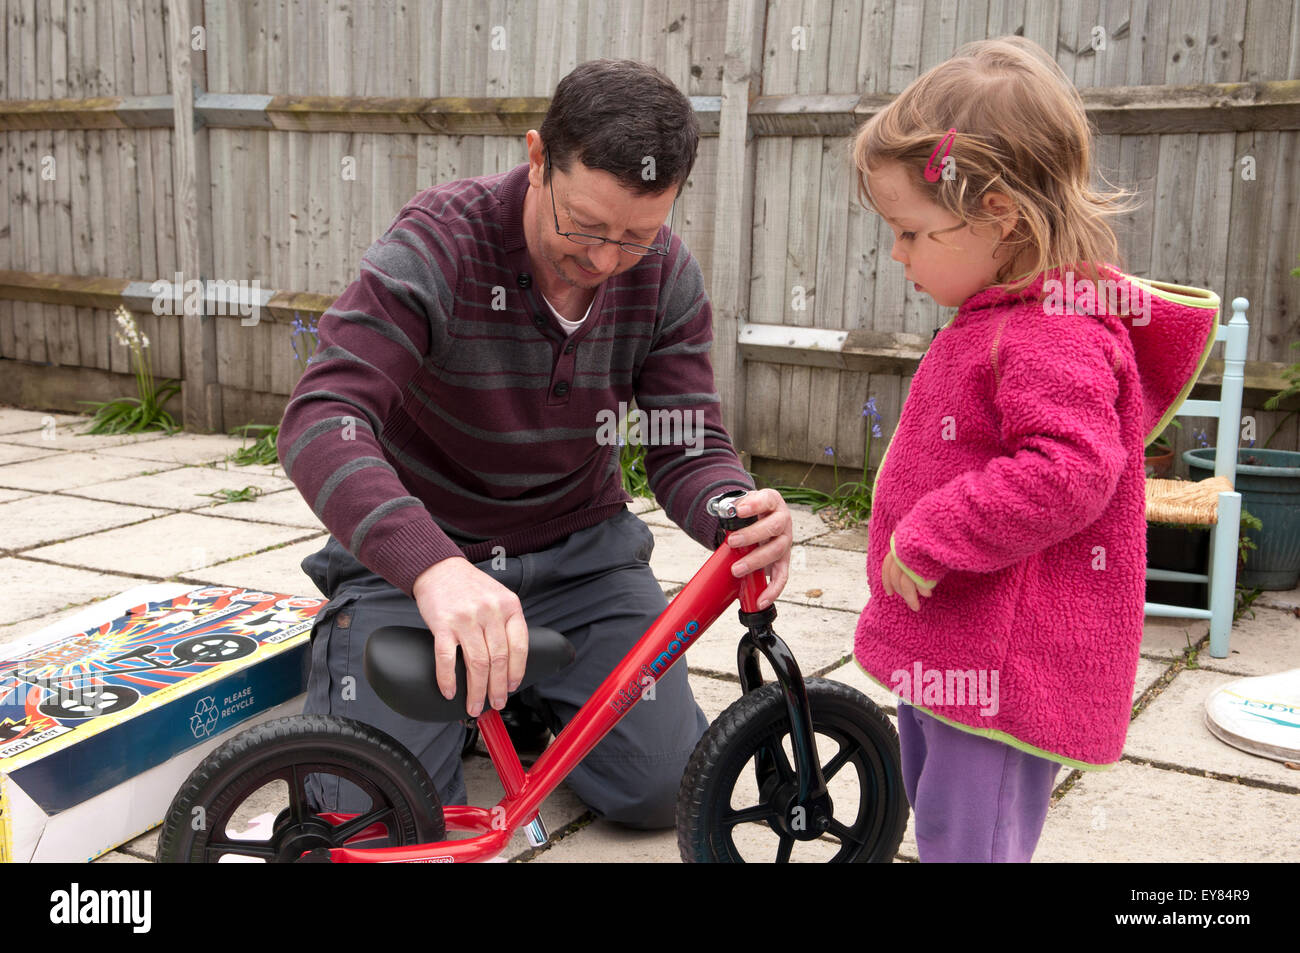 Little girl looking at her new balance bike, birthday present from her  grandfather Stock Photo - Alamy